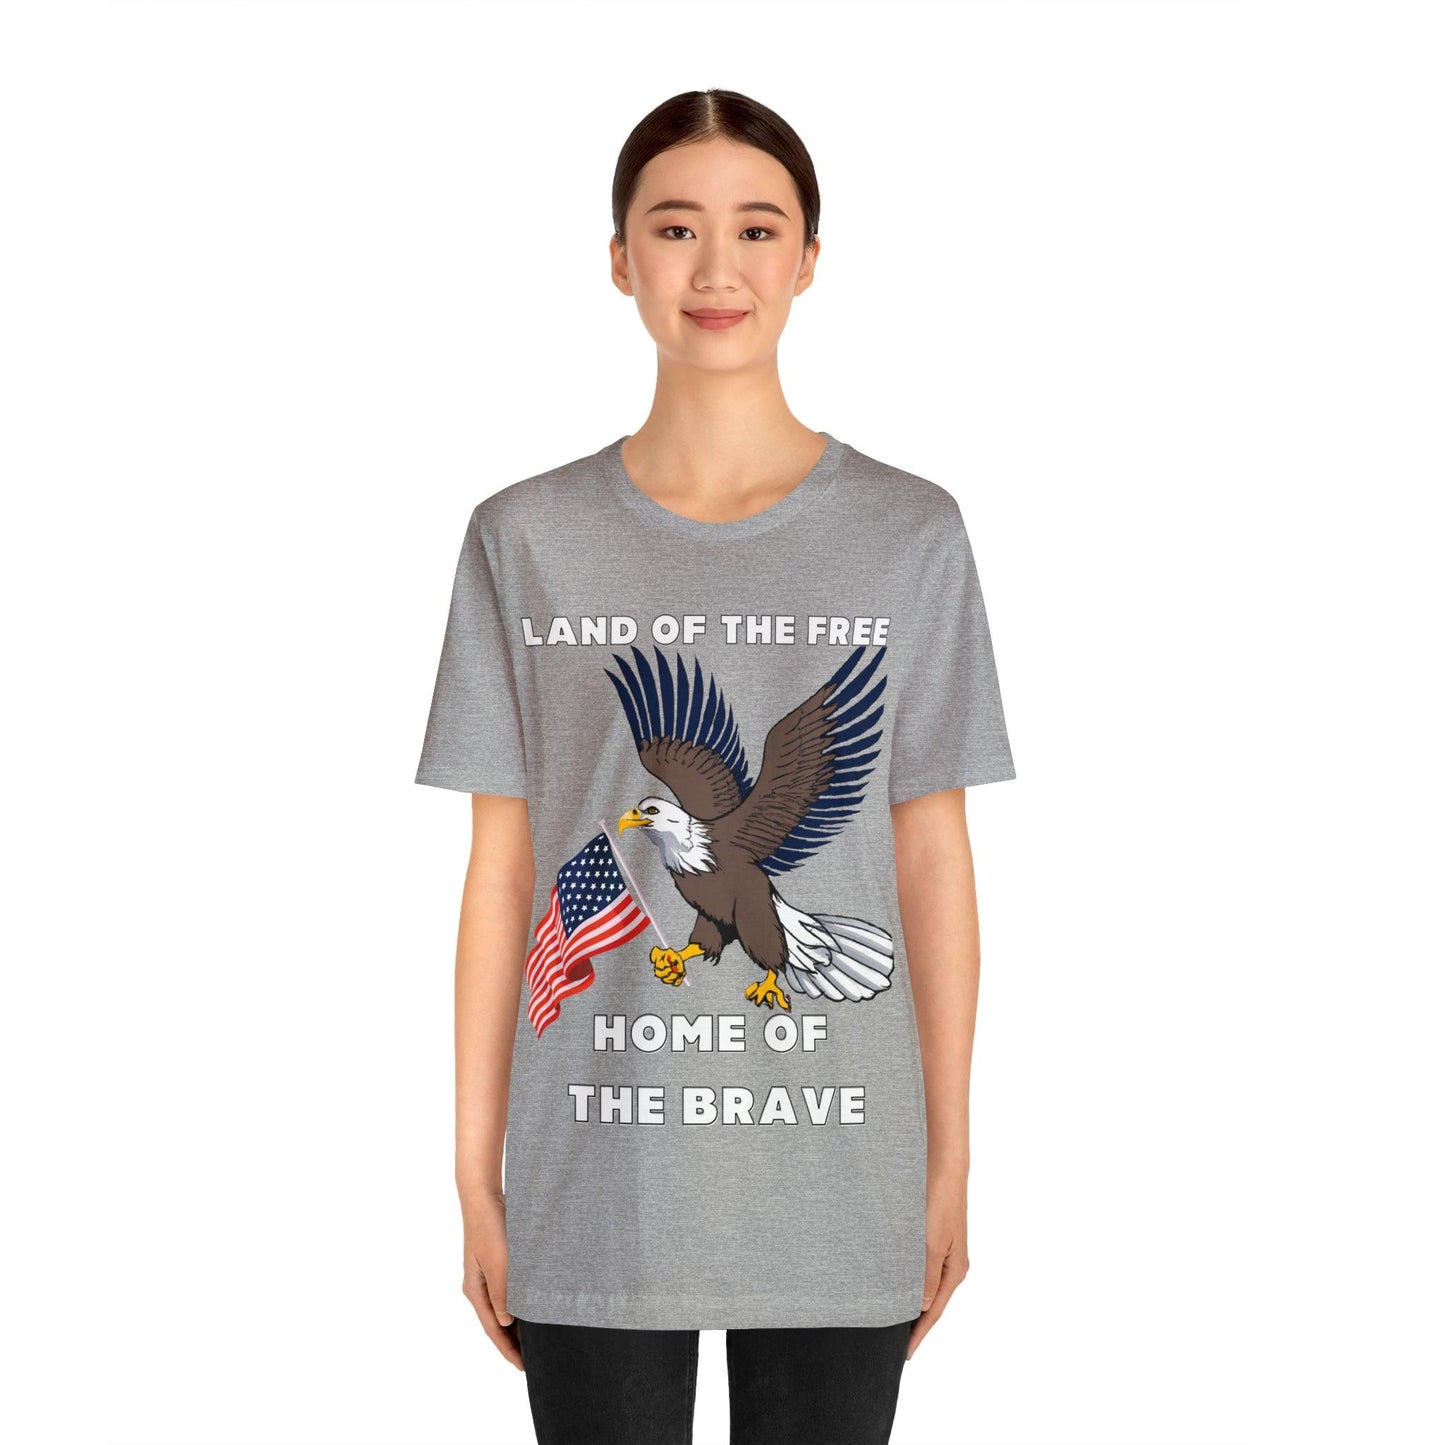 Land of the Free, Home of the Brave: Celebrate Independence Day with Patriotic Shirts - Freedom, Fireworks, and More